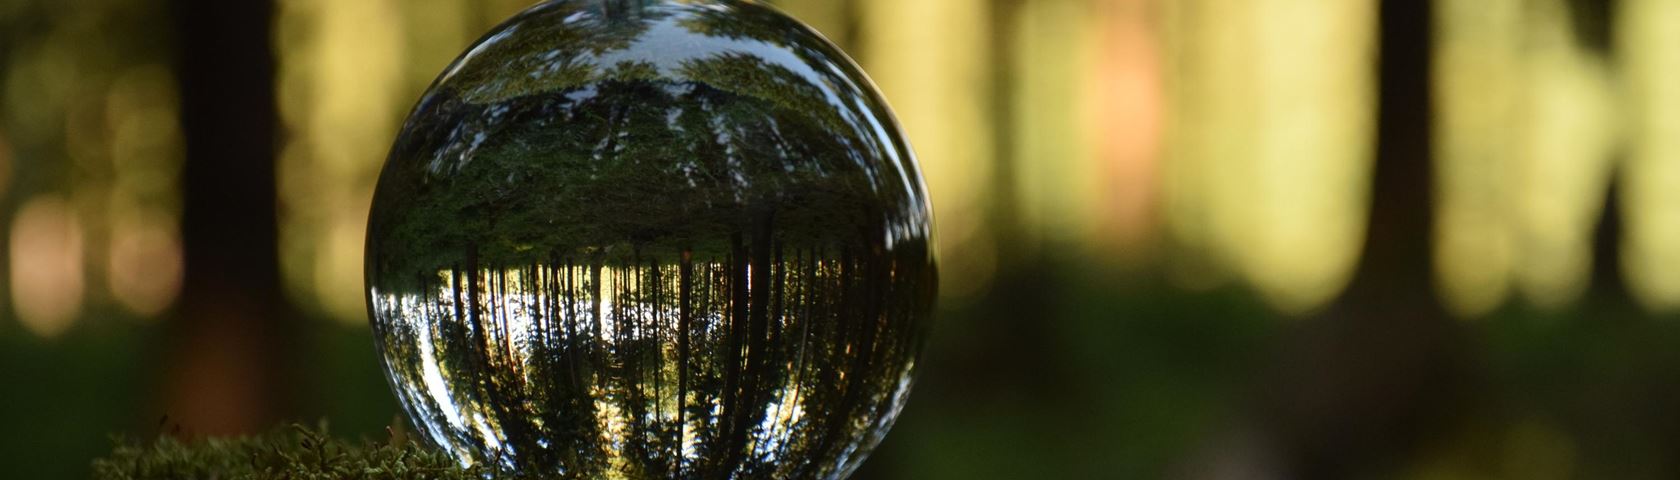 Forest in a Sphere